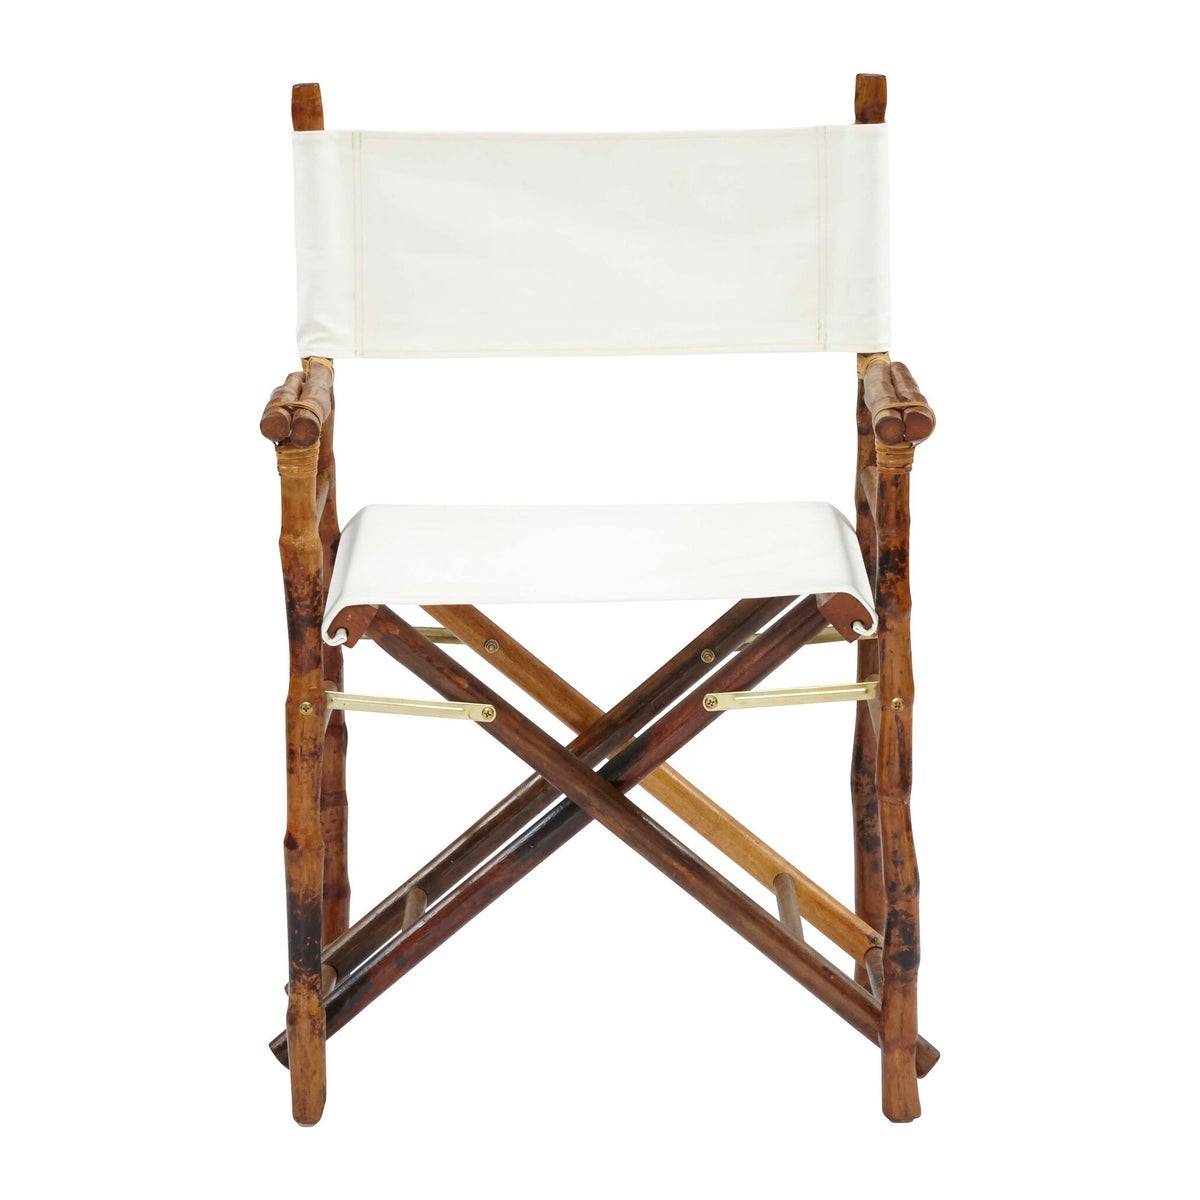 Folding Campaign Directors Chair Frame Color - Tortoise Matte  Seat and Back Color - White Price